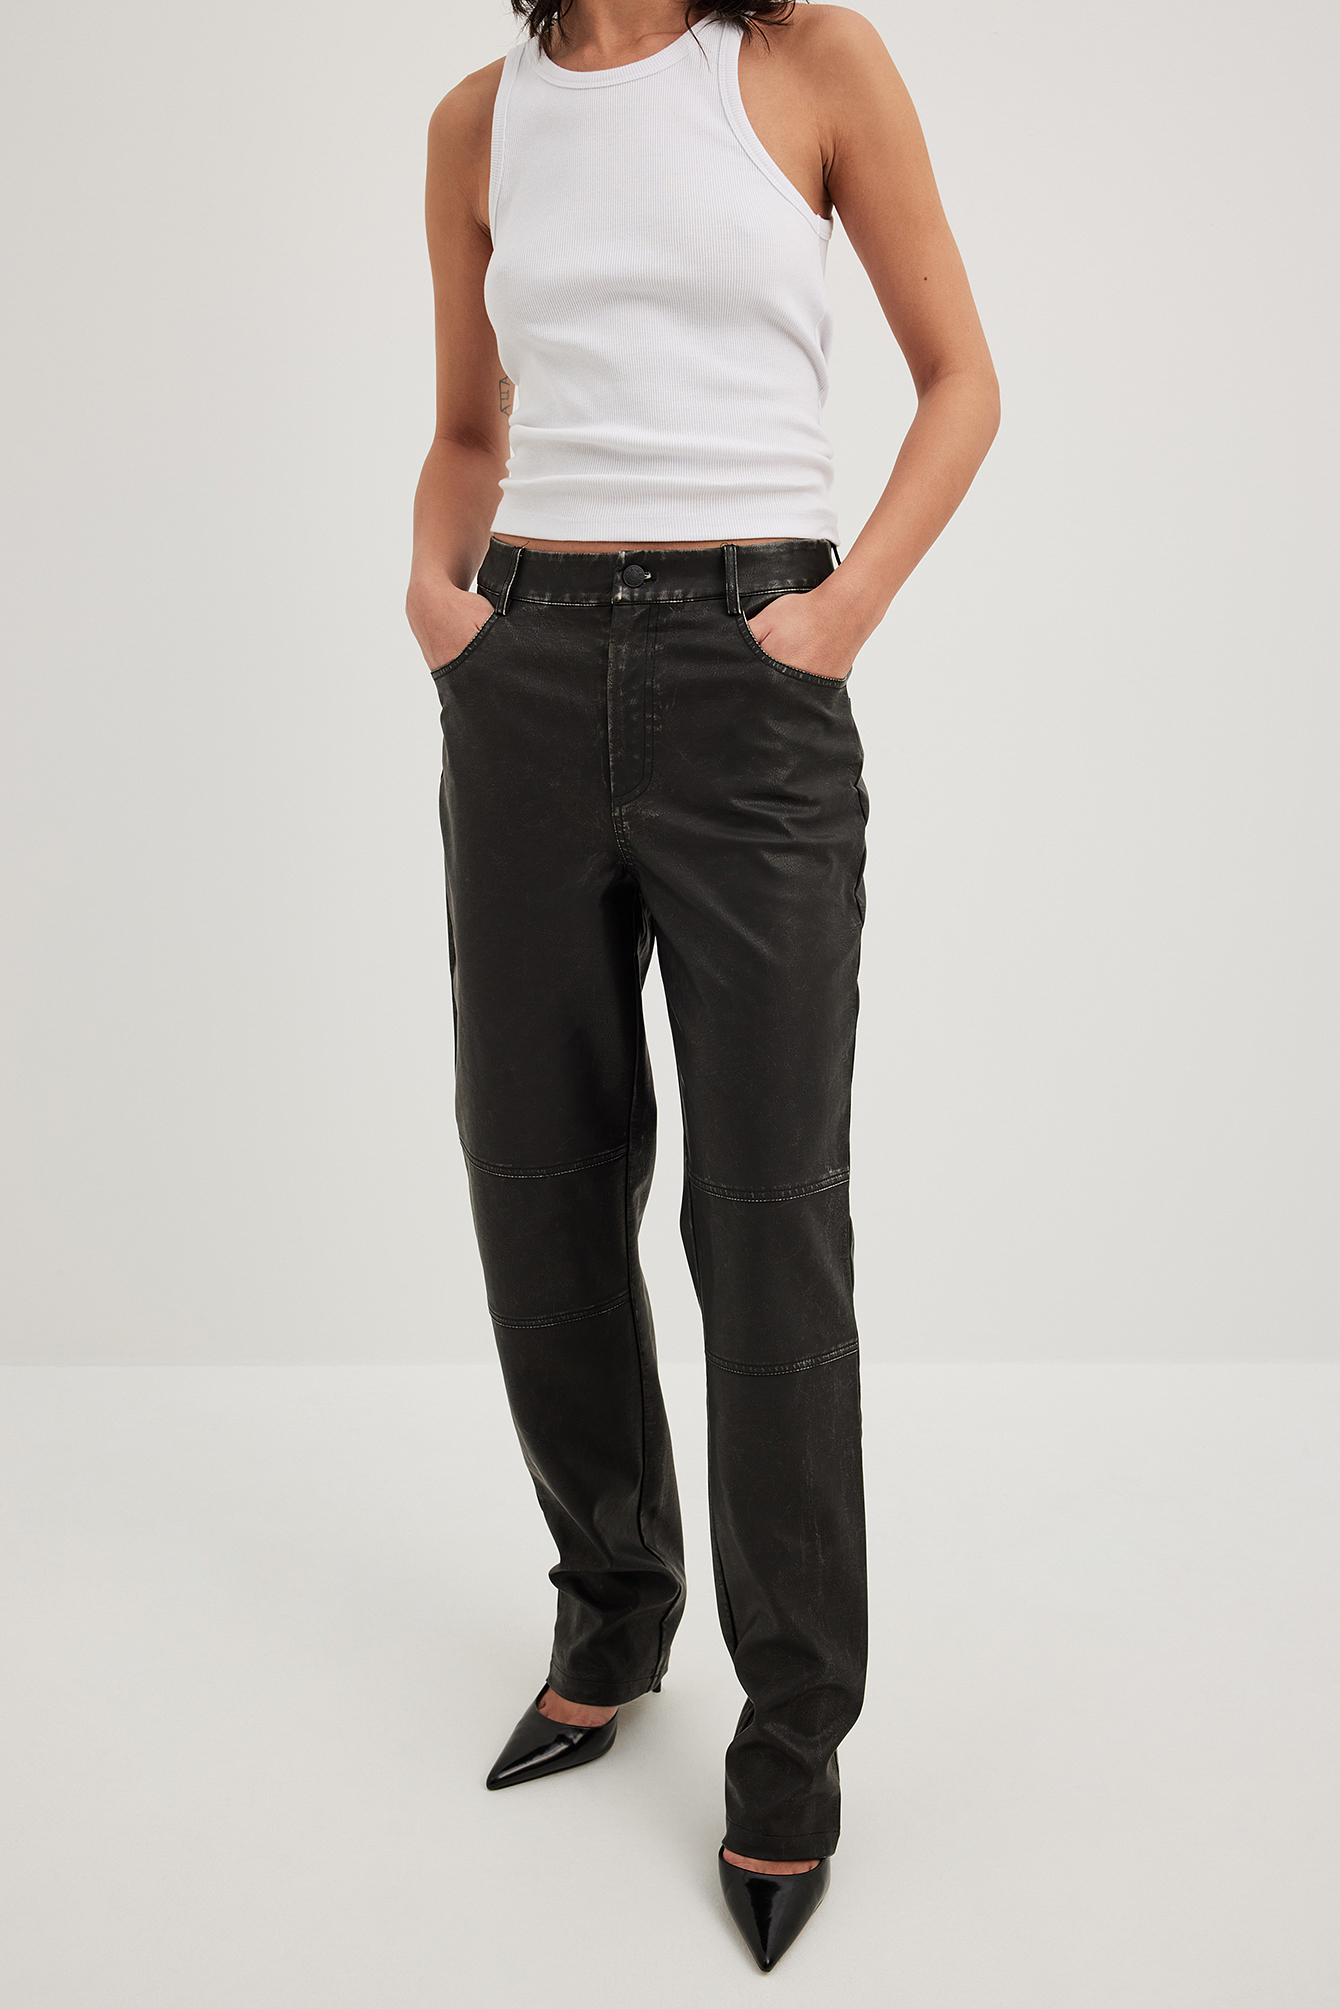 Buy H&M Women Black High Waisted Tailored Trousers - Trousers for Women  19410206 | Myntra